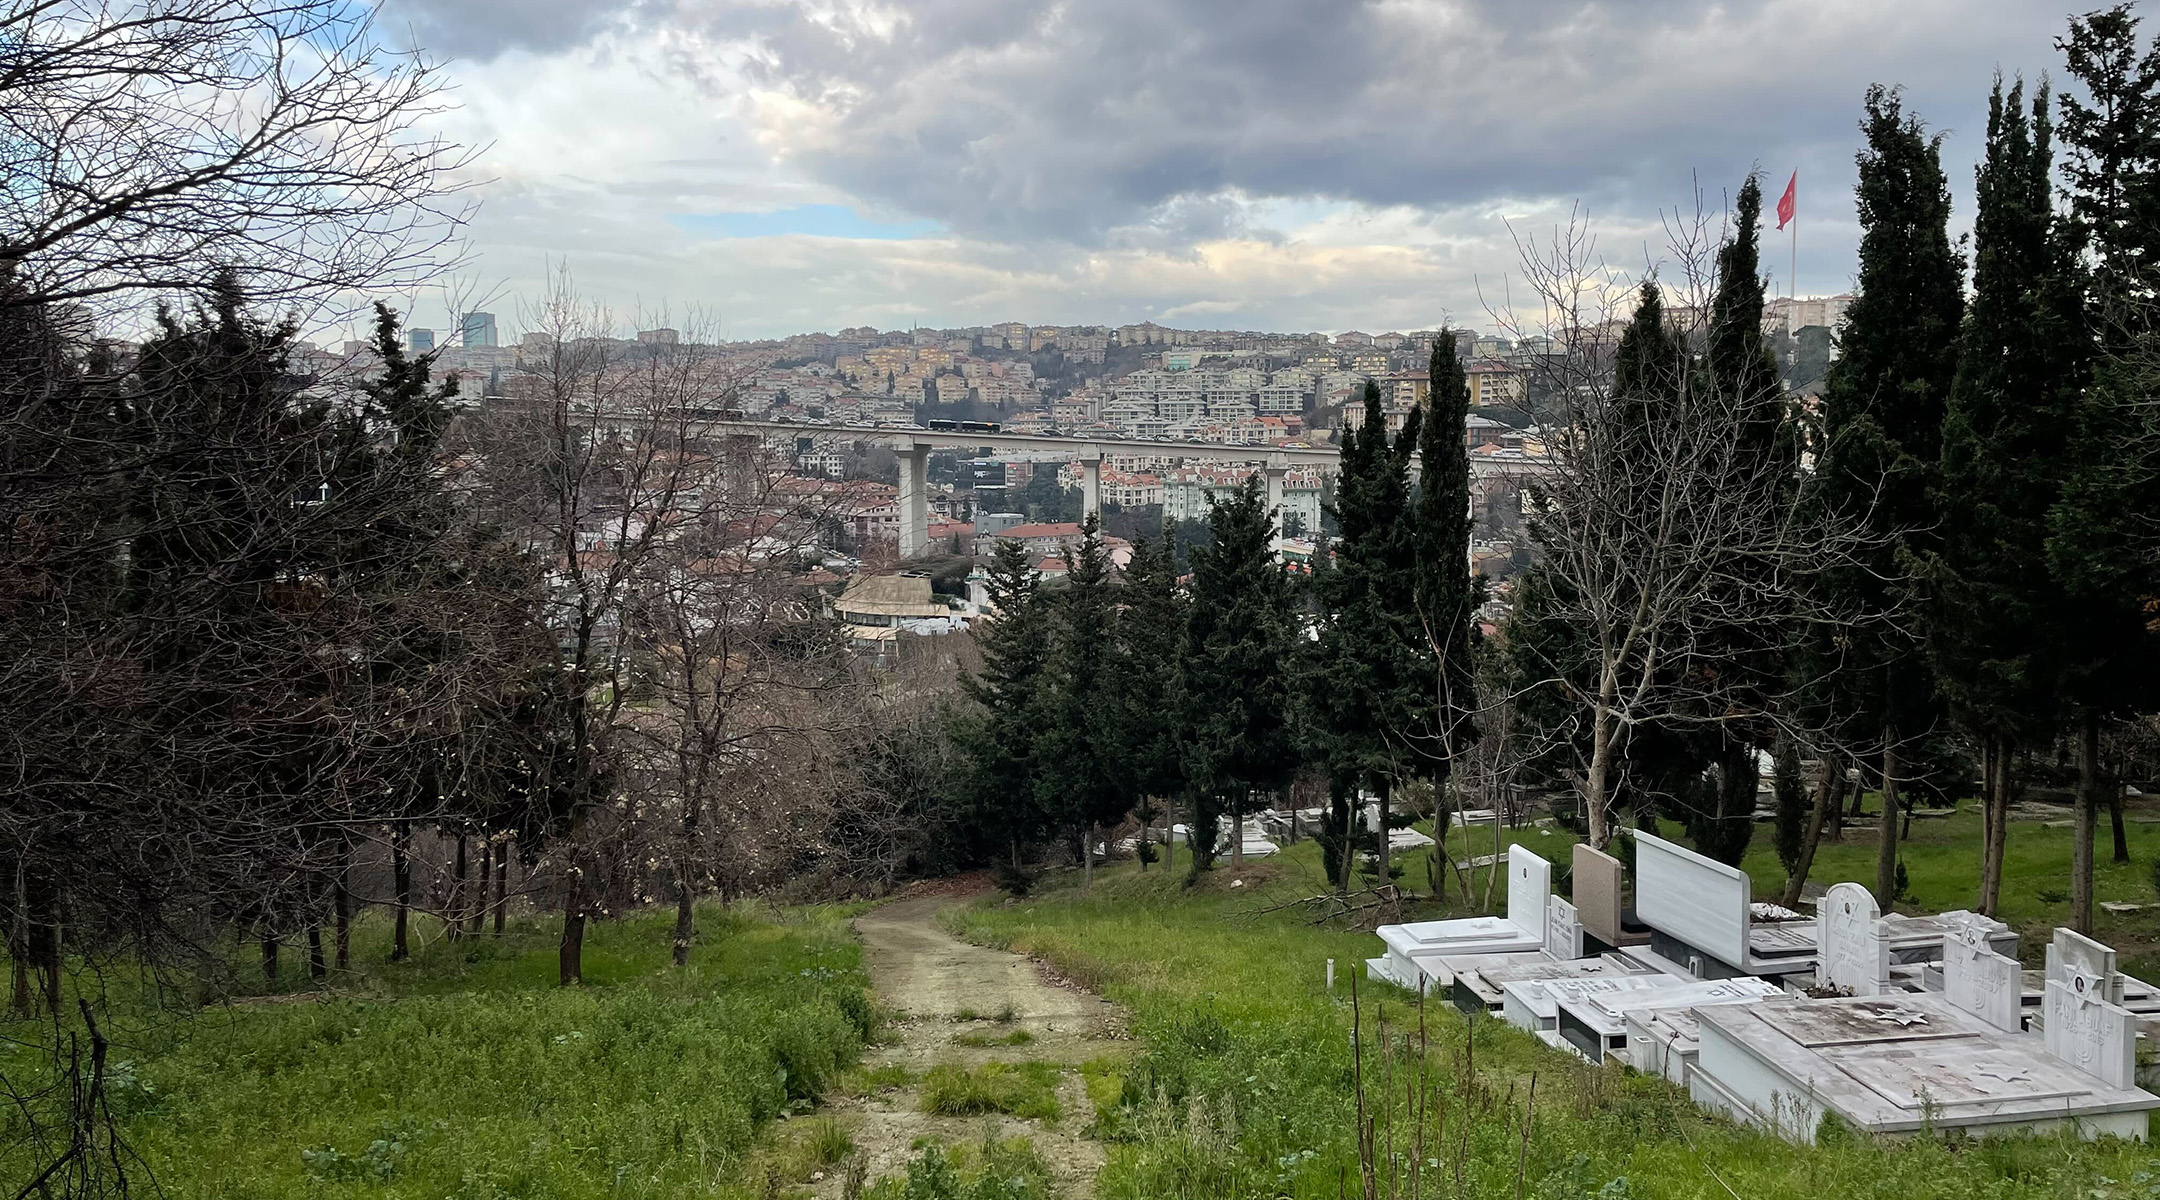 The Jewish cemetery where Katz is buried offers a hilltop view of the city. (David I. Klein)